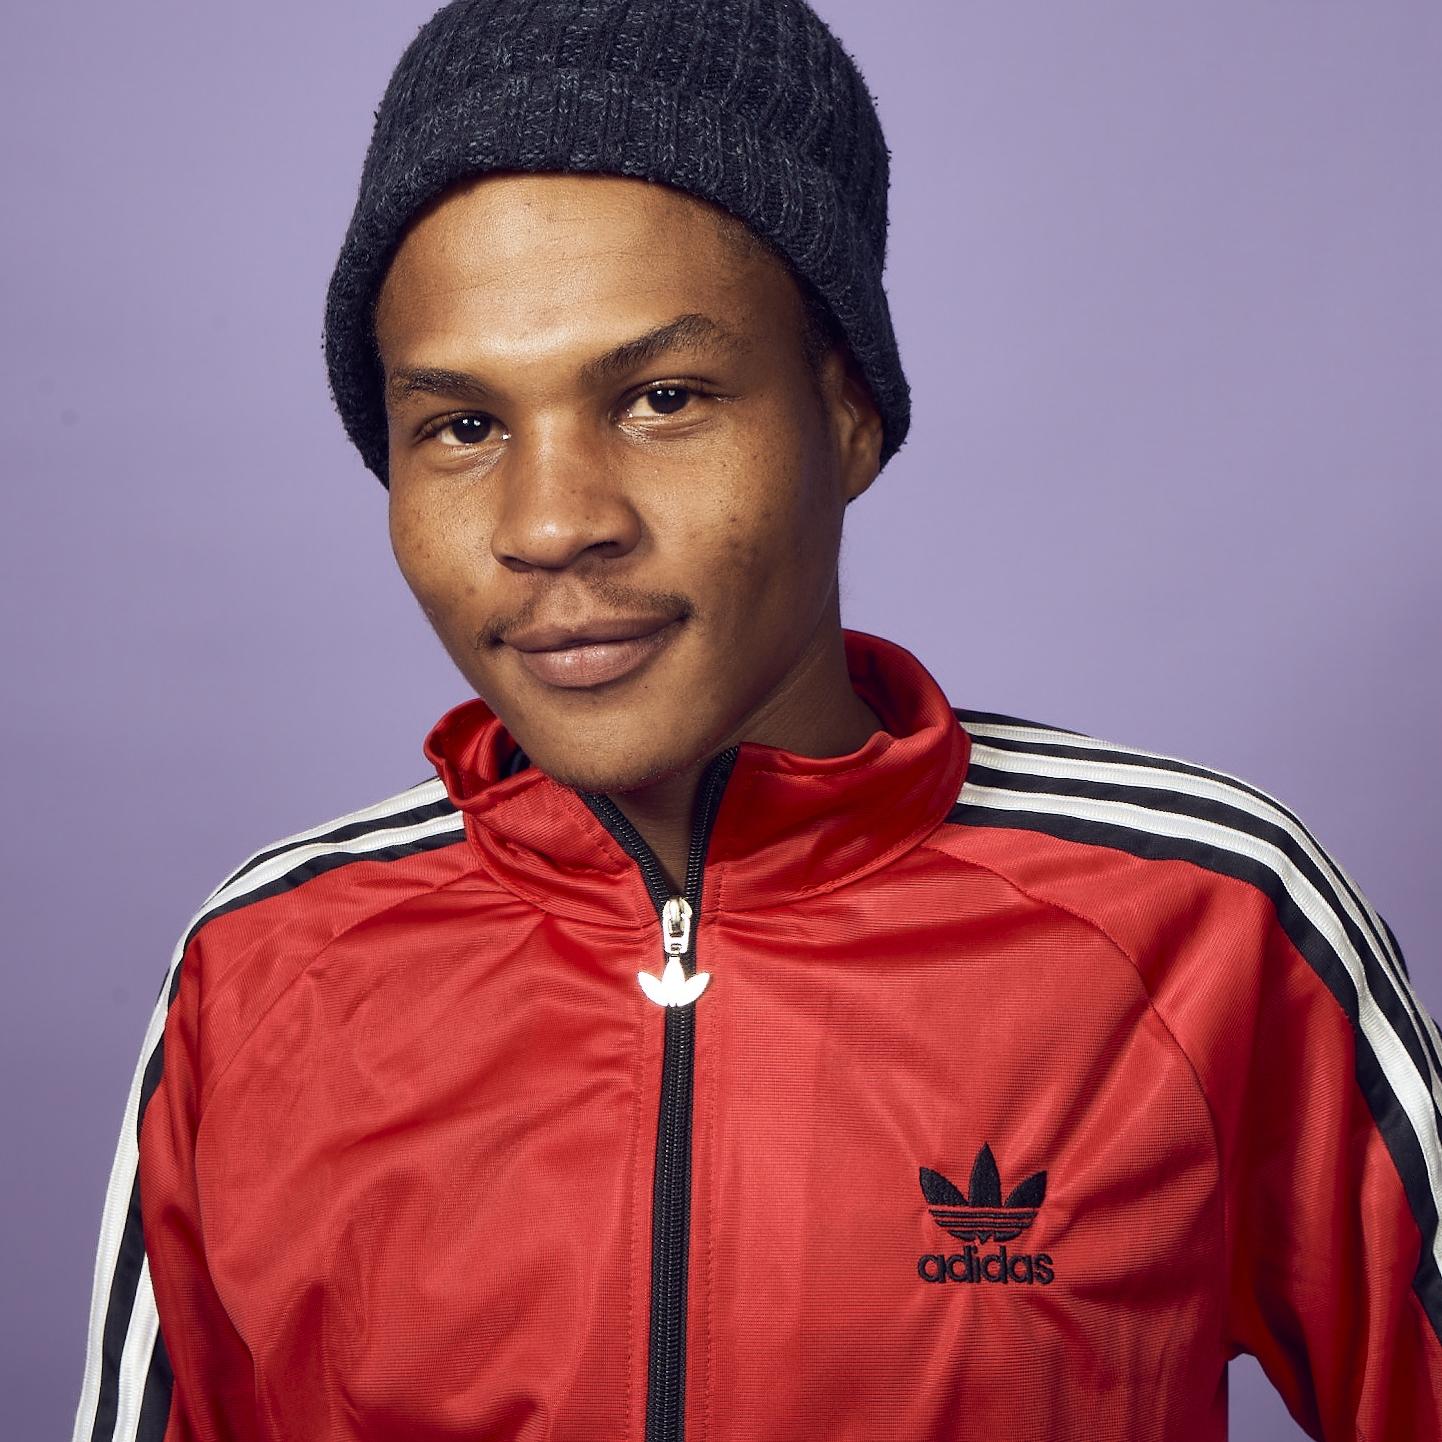 Innocent, a young man in a beanie hat and red Adidas tracksuit top standing in front of a lilac wall  